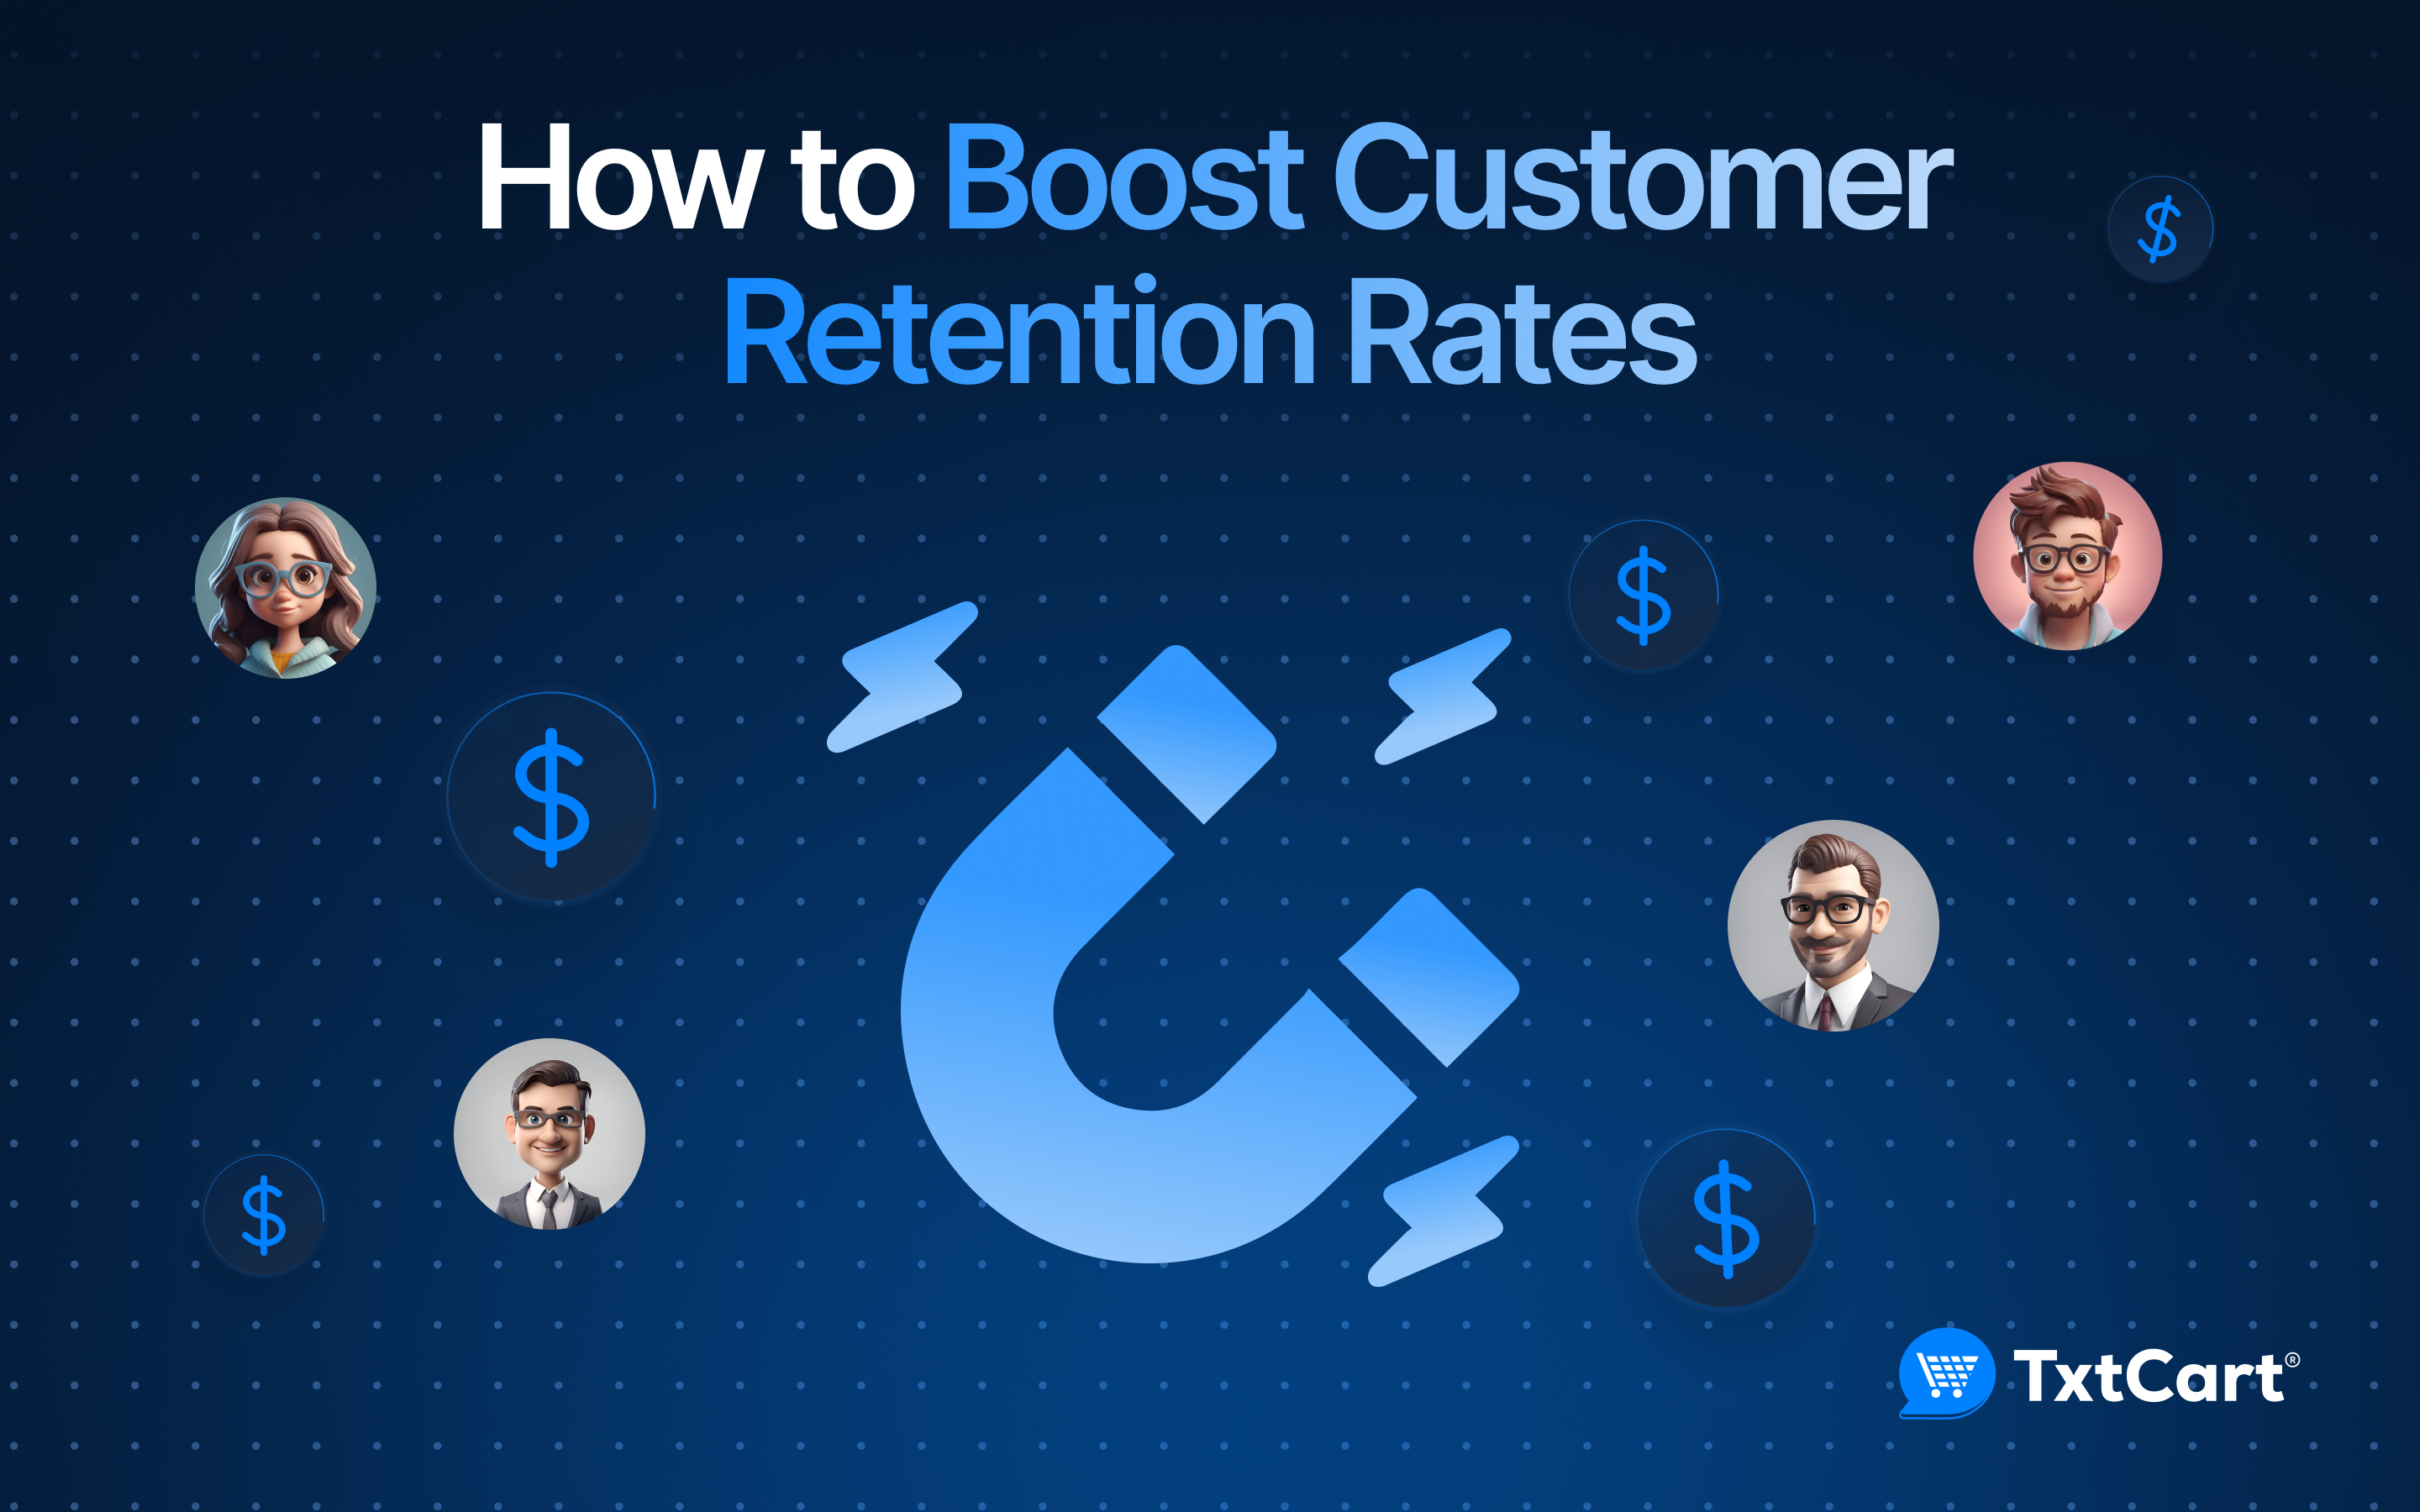 How to Boost Customer Retention Rates